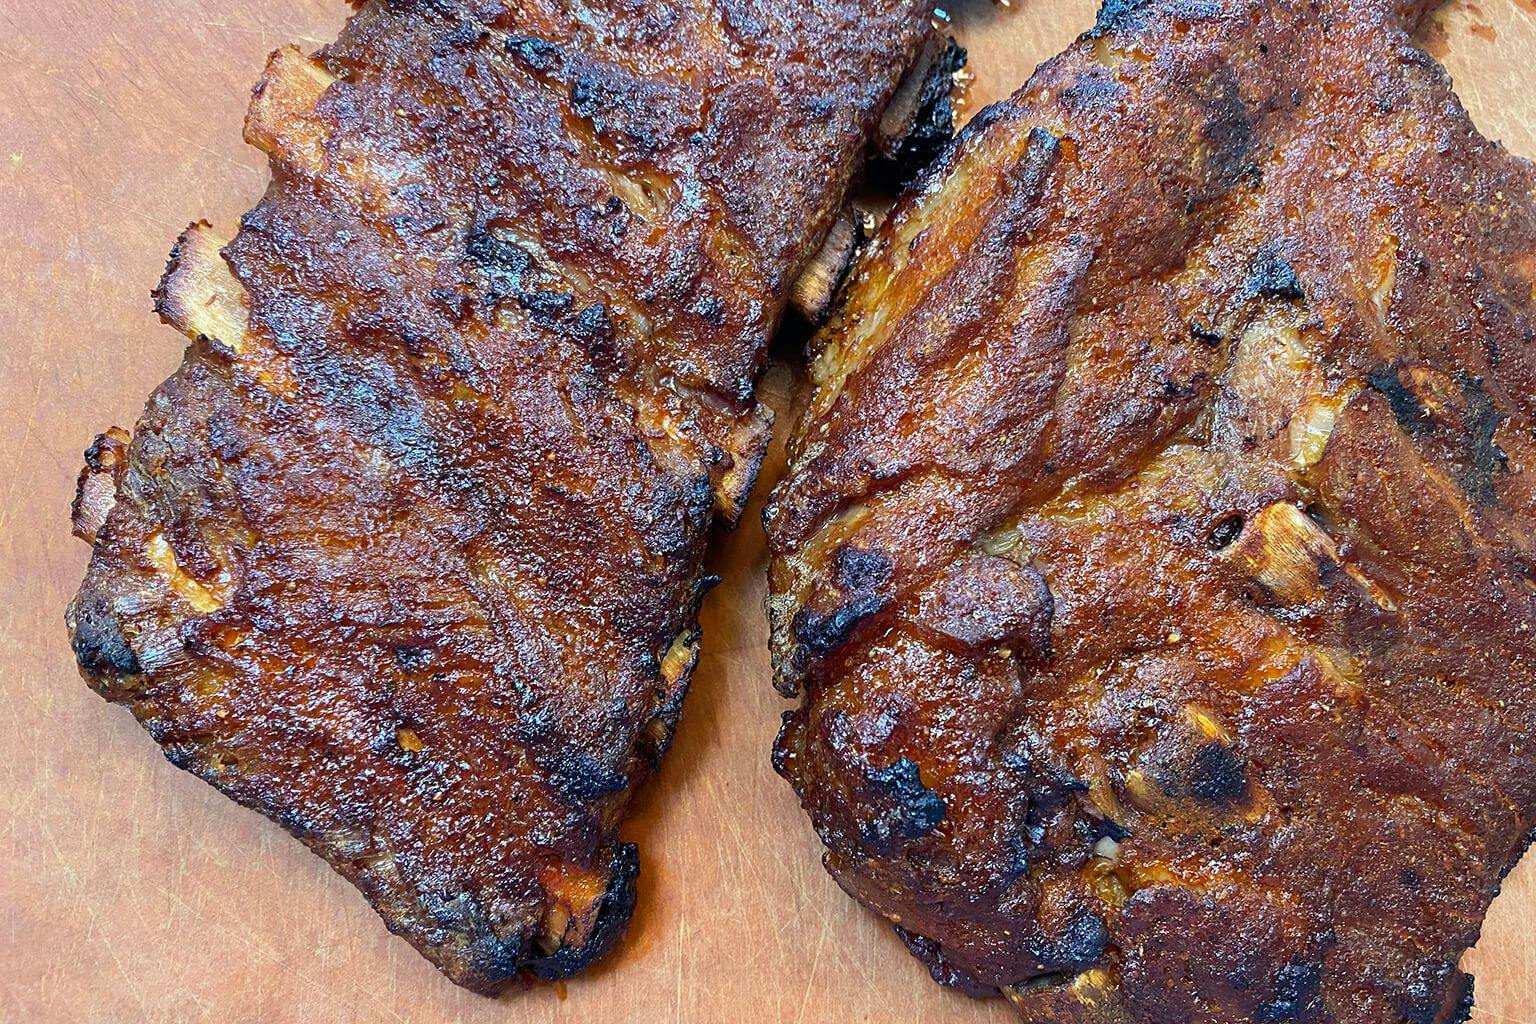 completed roasted kalbi